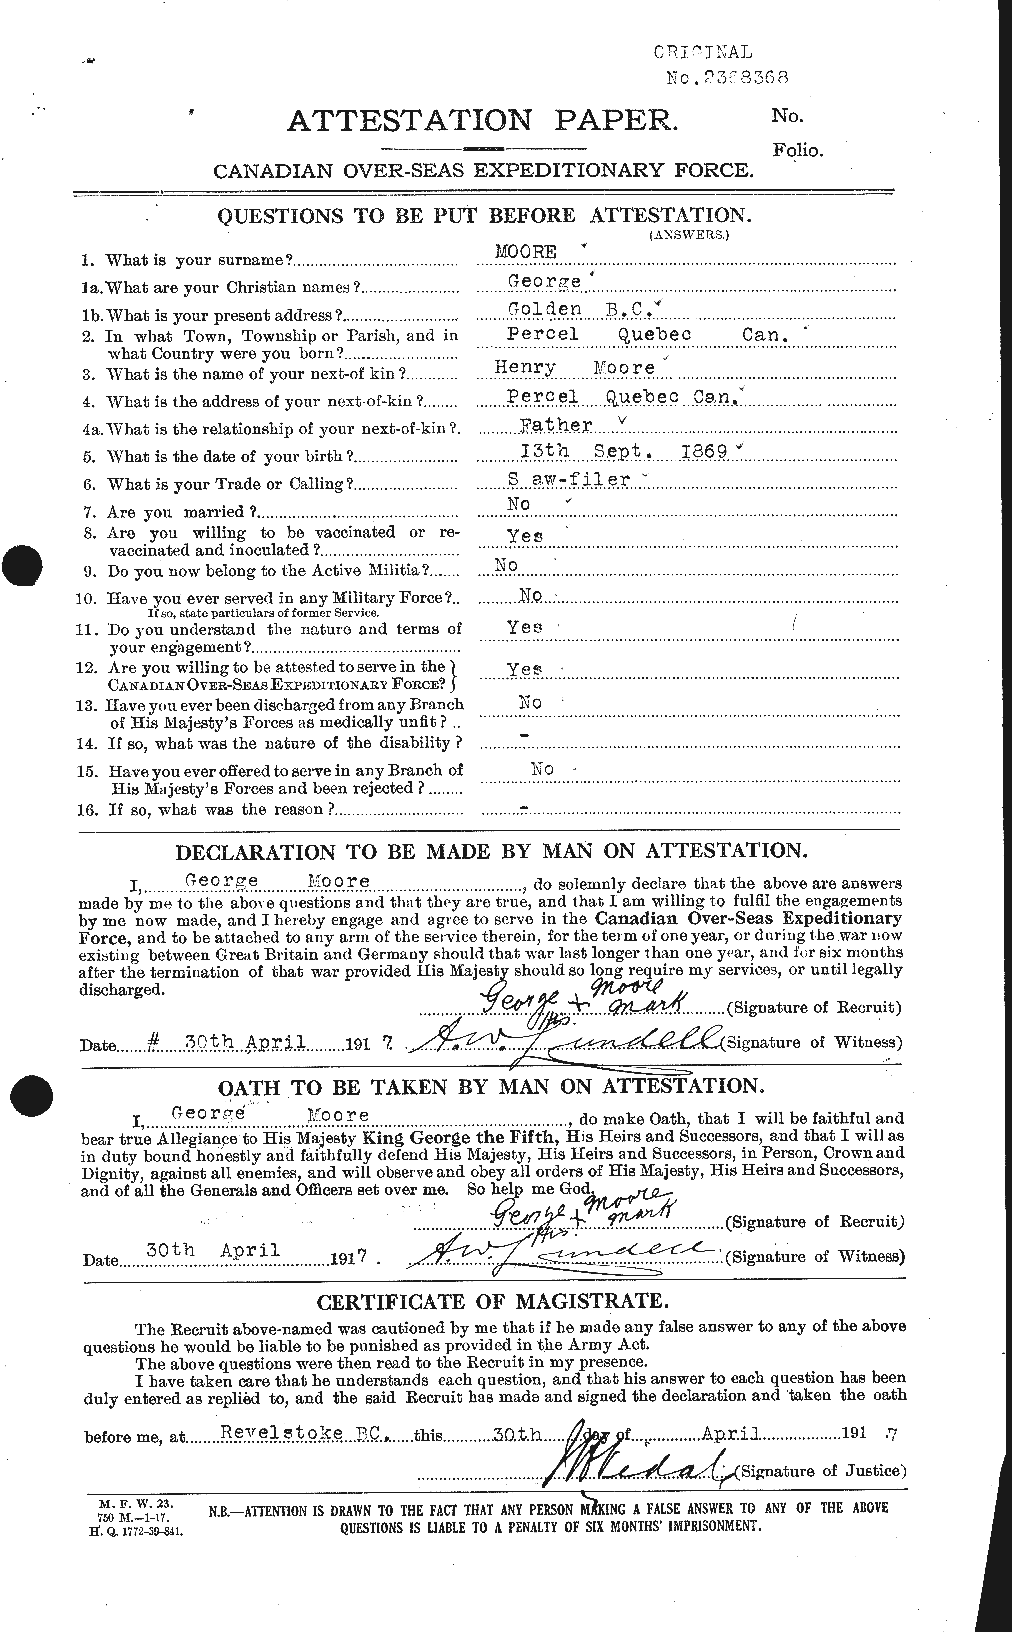 Personnel Records of the First World War - CEF 501974a